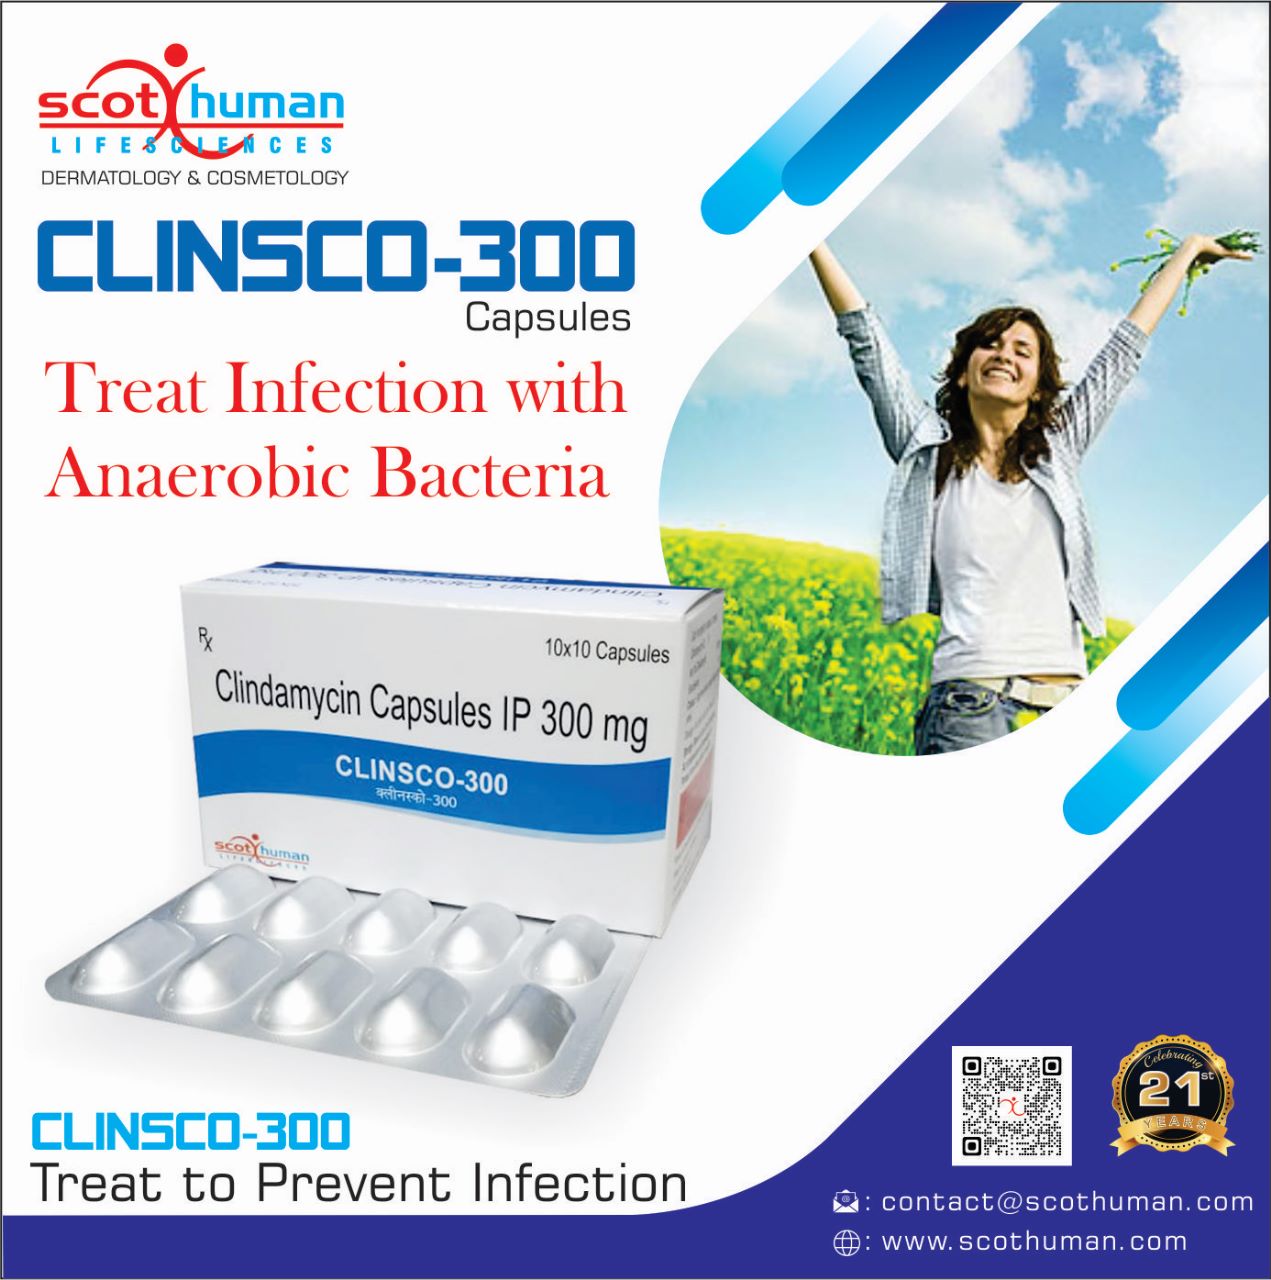 Product Name: Clinsco 300, Compositions of Clinsco 300 are Clindamycin Capsules ip 300 mg - Pharma Drugs and Chemicals